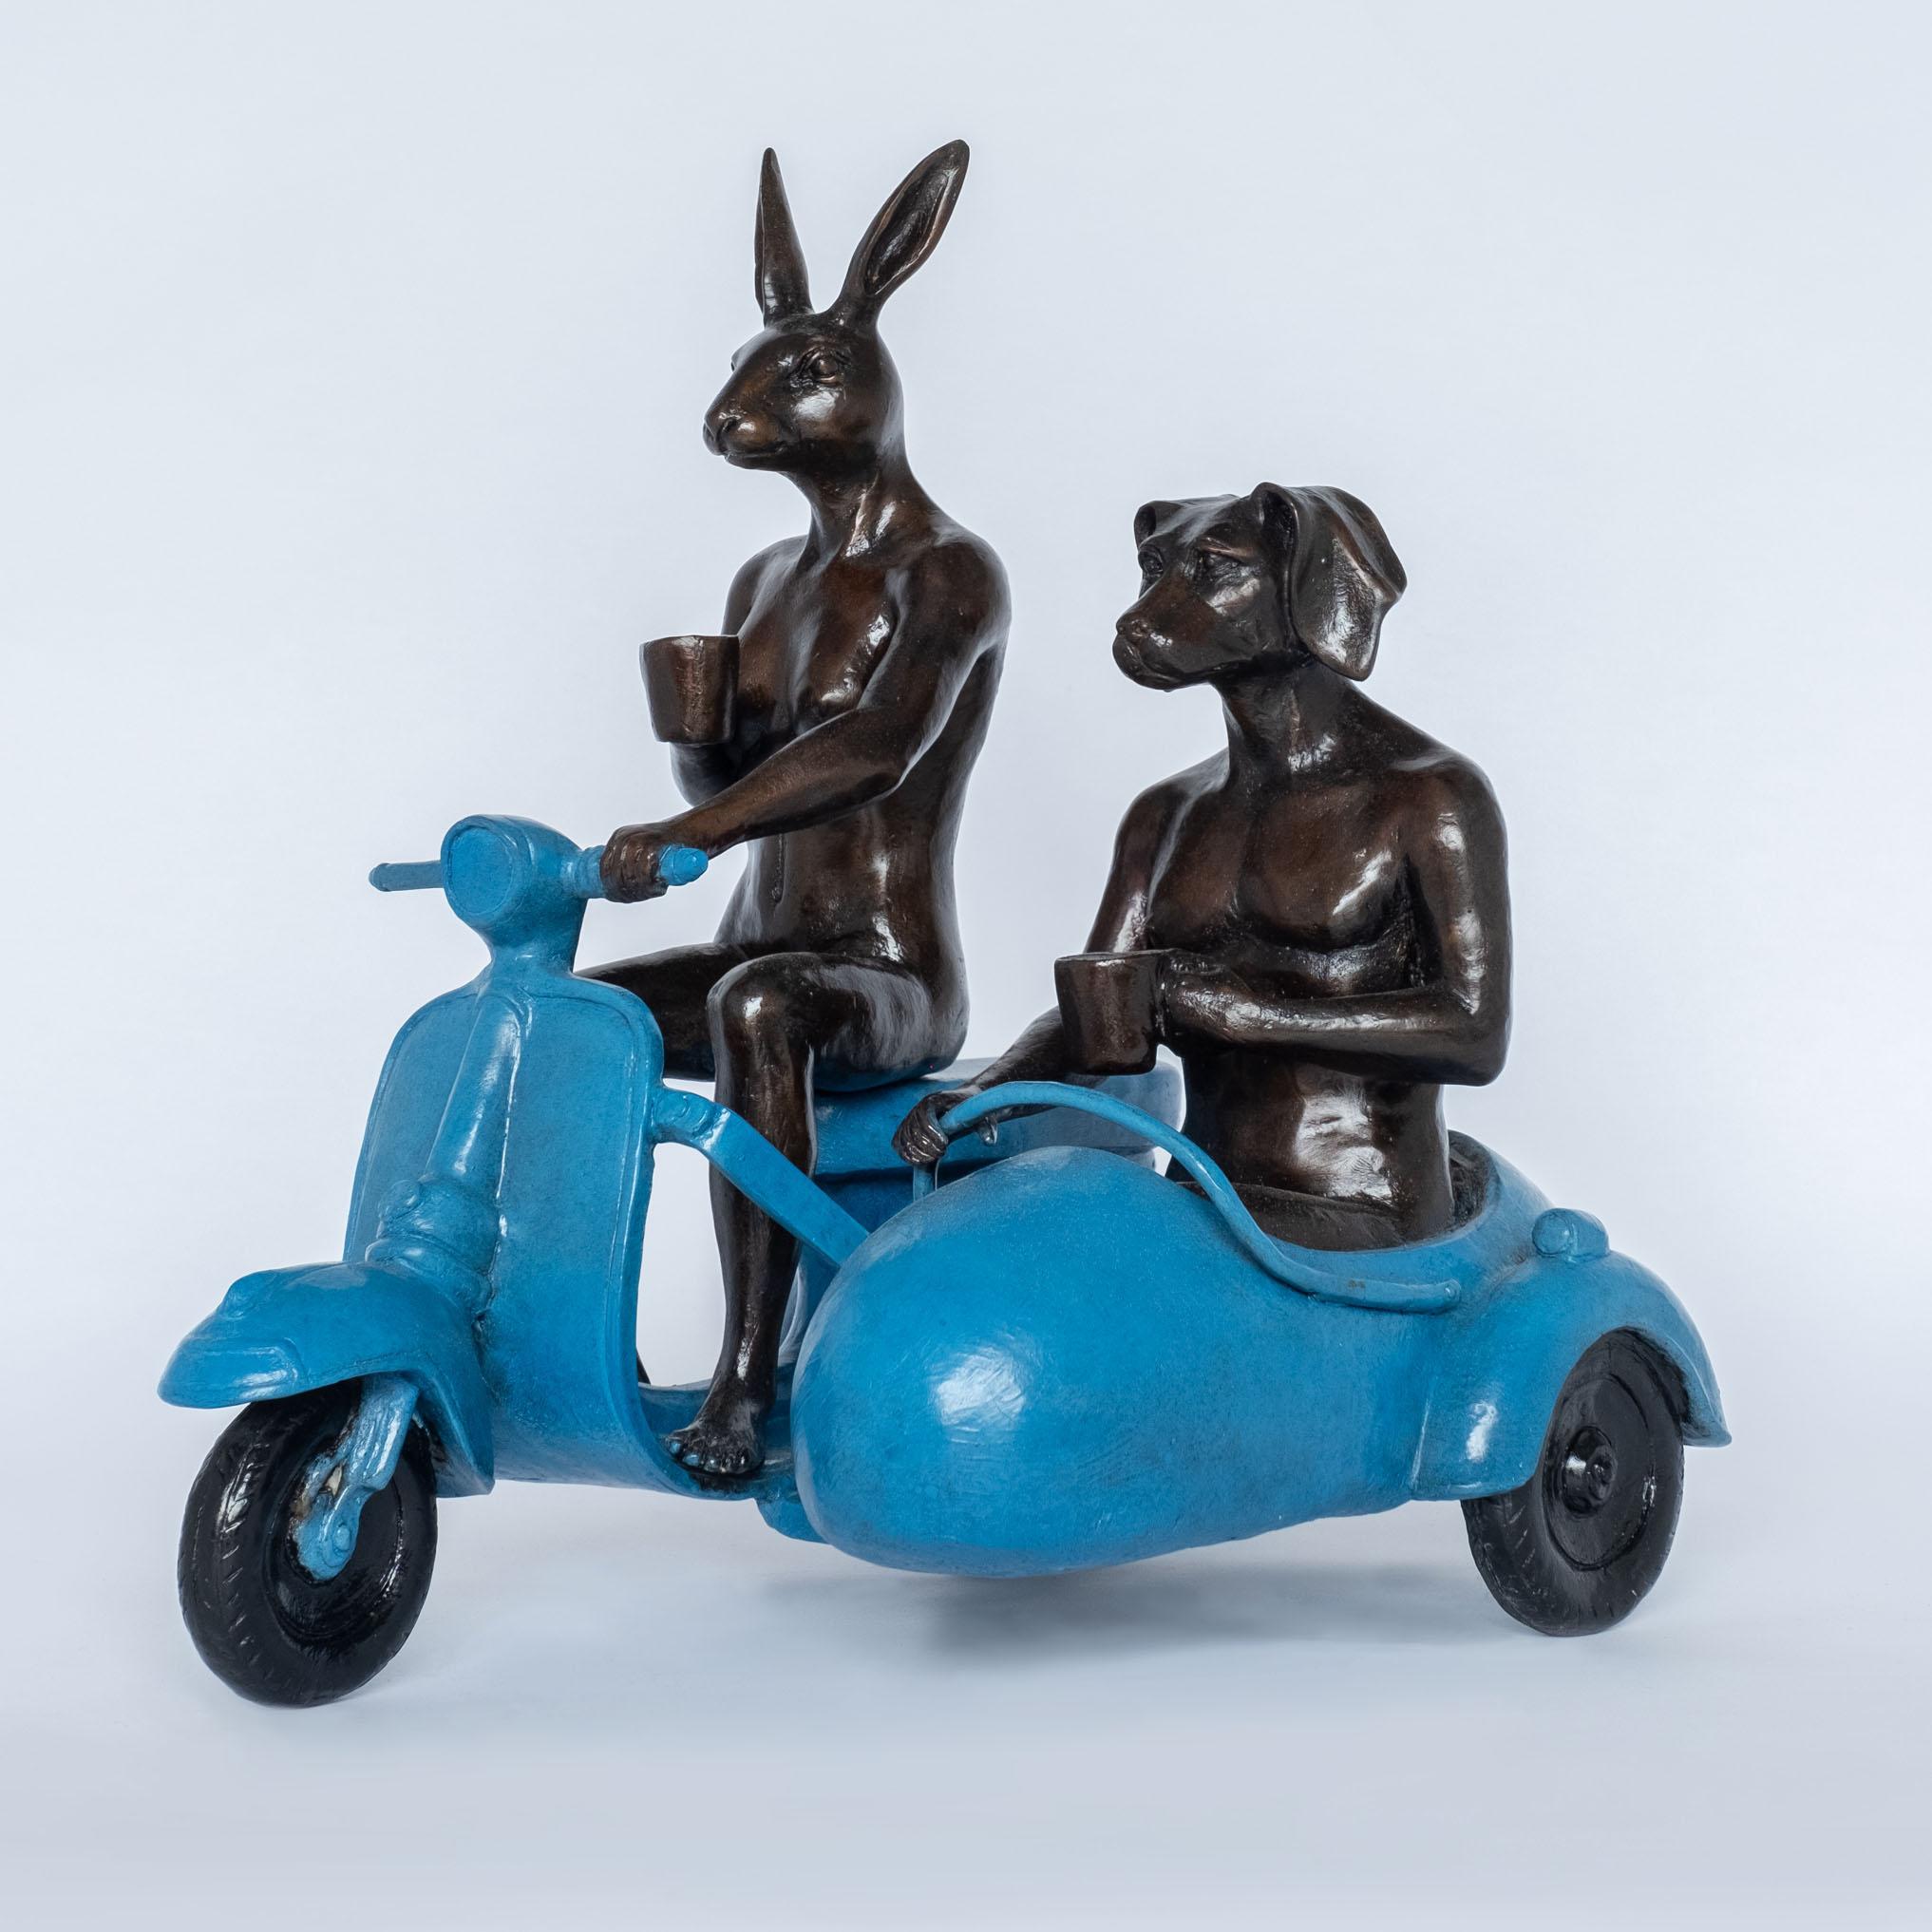 'They were always side by side' by Gillie & Marc, bronze sculpture, patina - Sculpture by Gillie and Marc Schattner